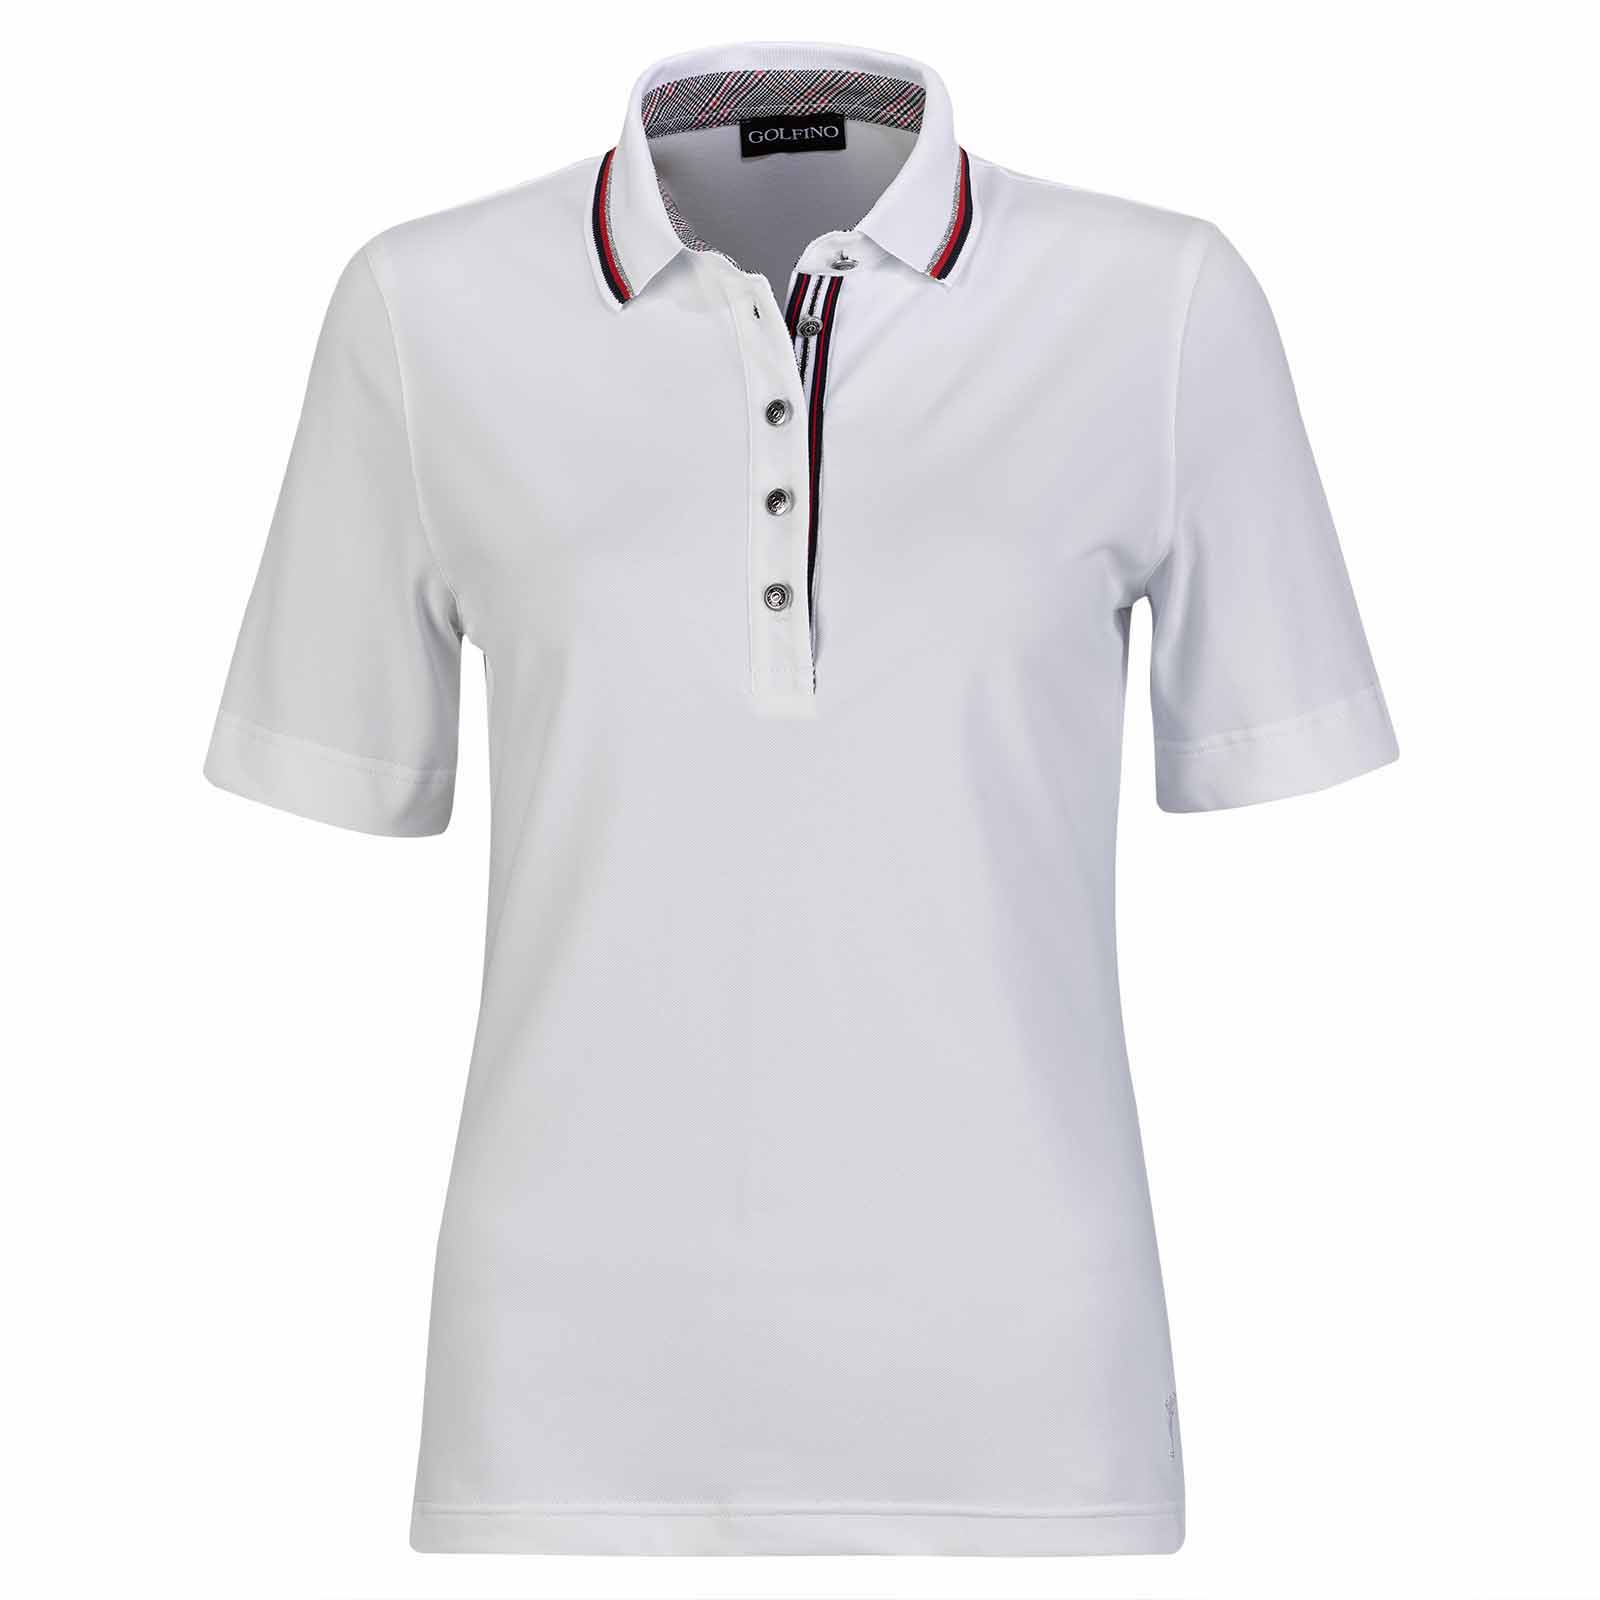 Ladies' short-sleeved polo shirt with sun protection in slim fit